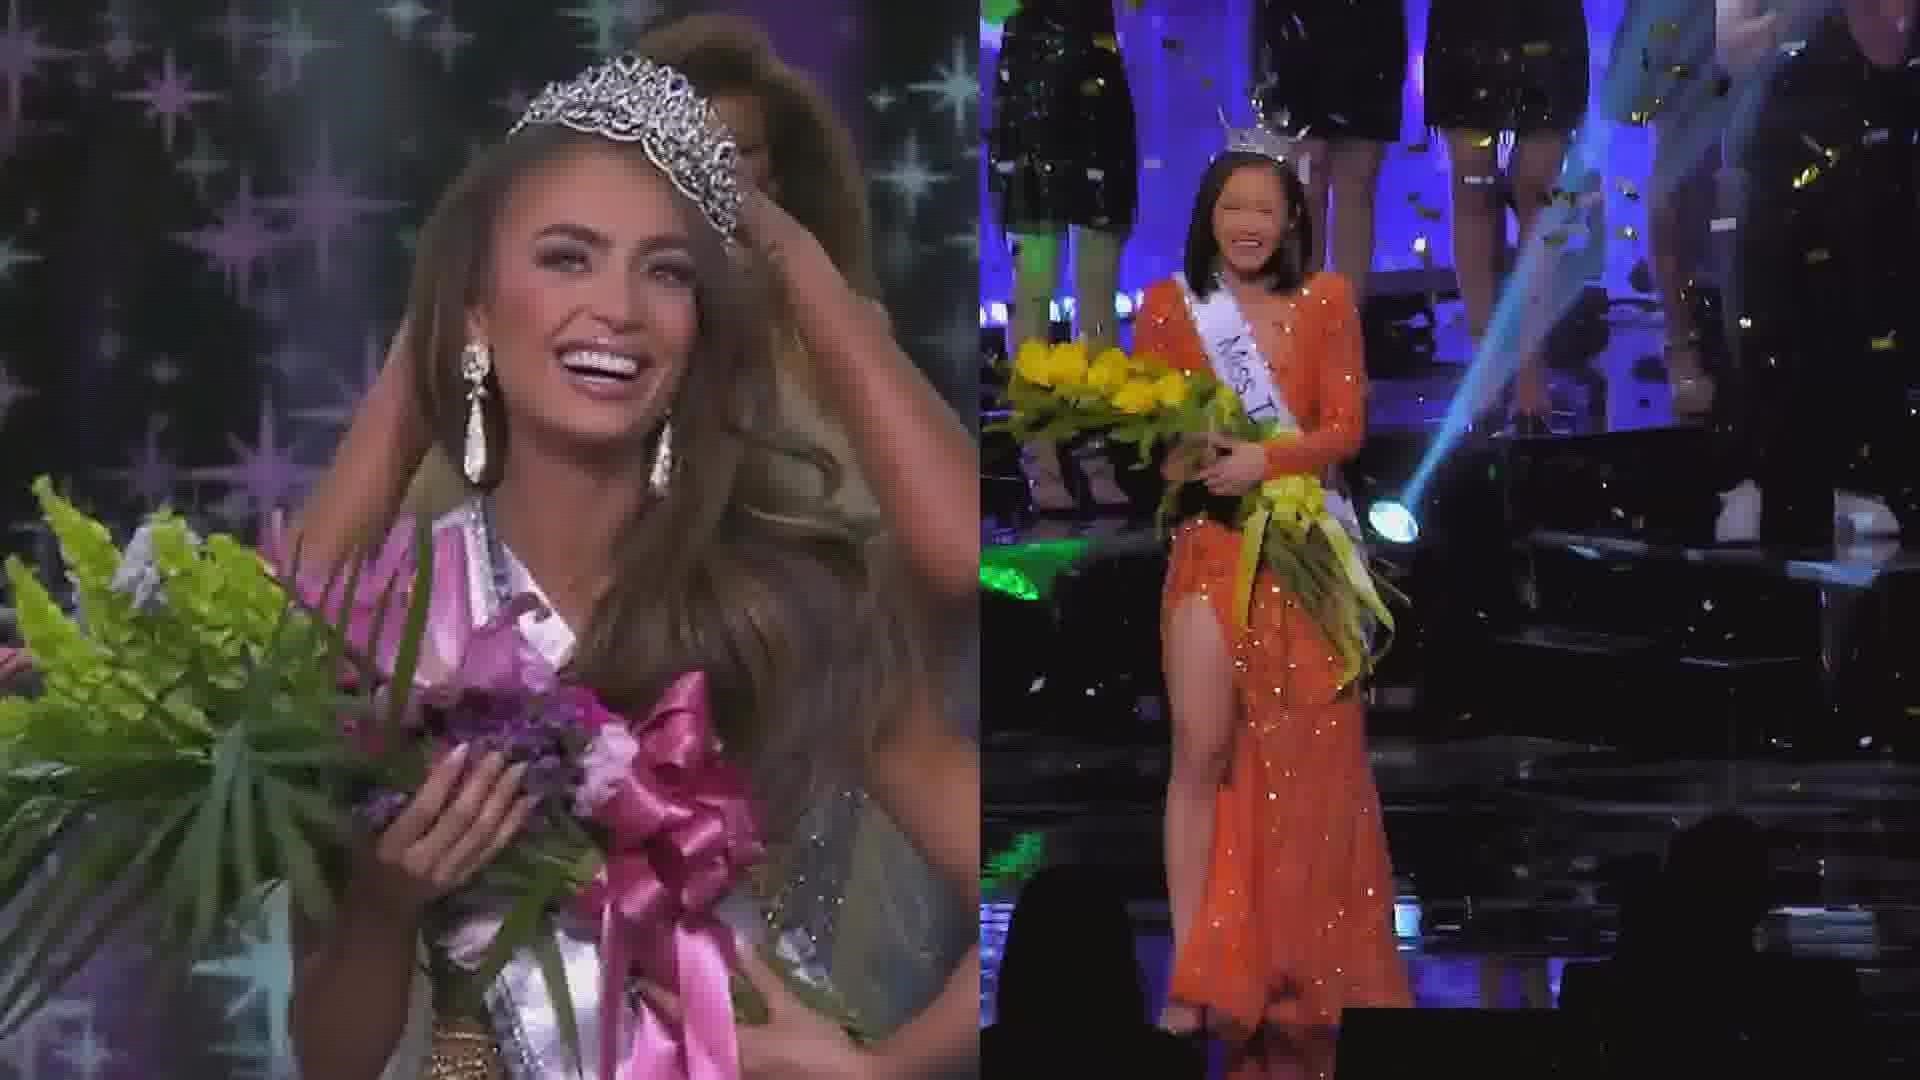 Miss USA is from Houston, and Miss Texas is from McKinney.